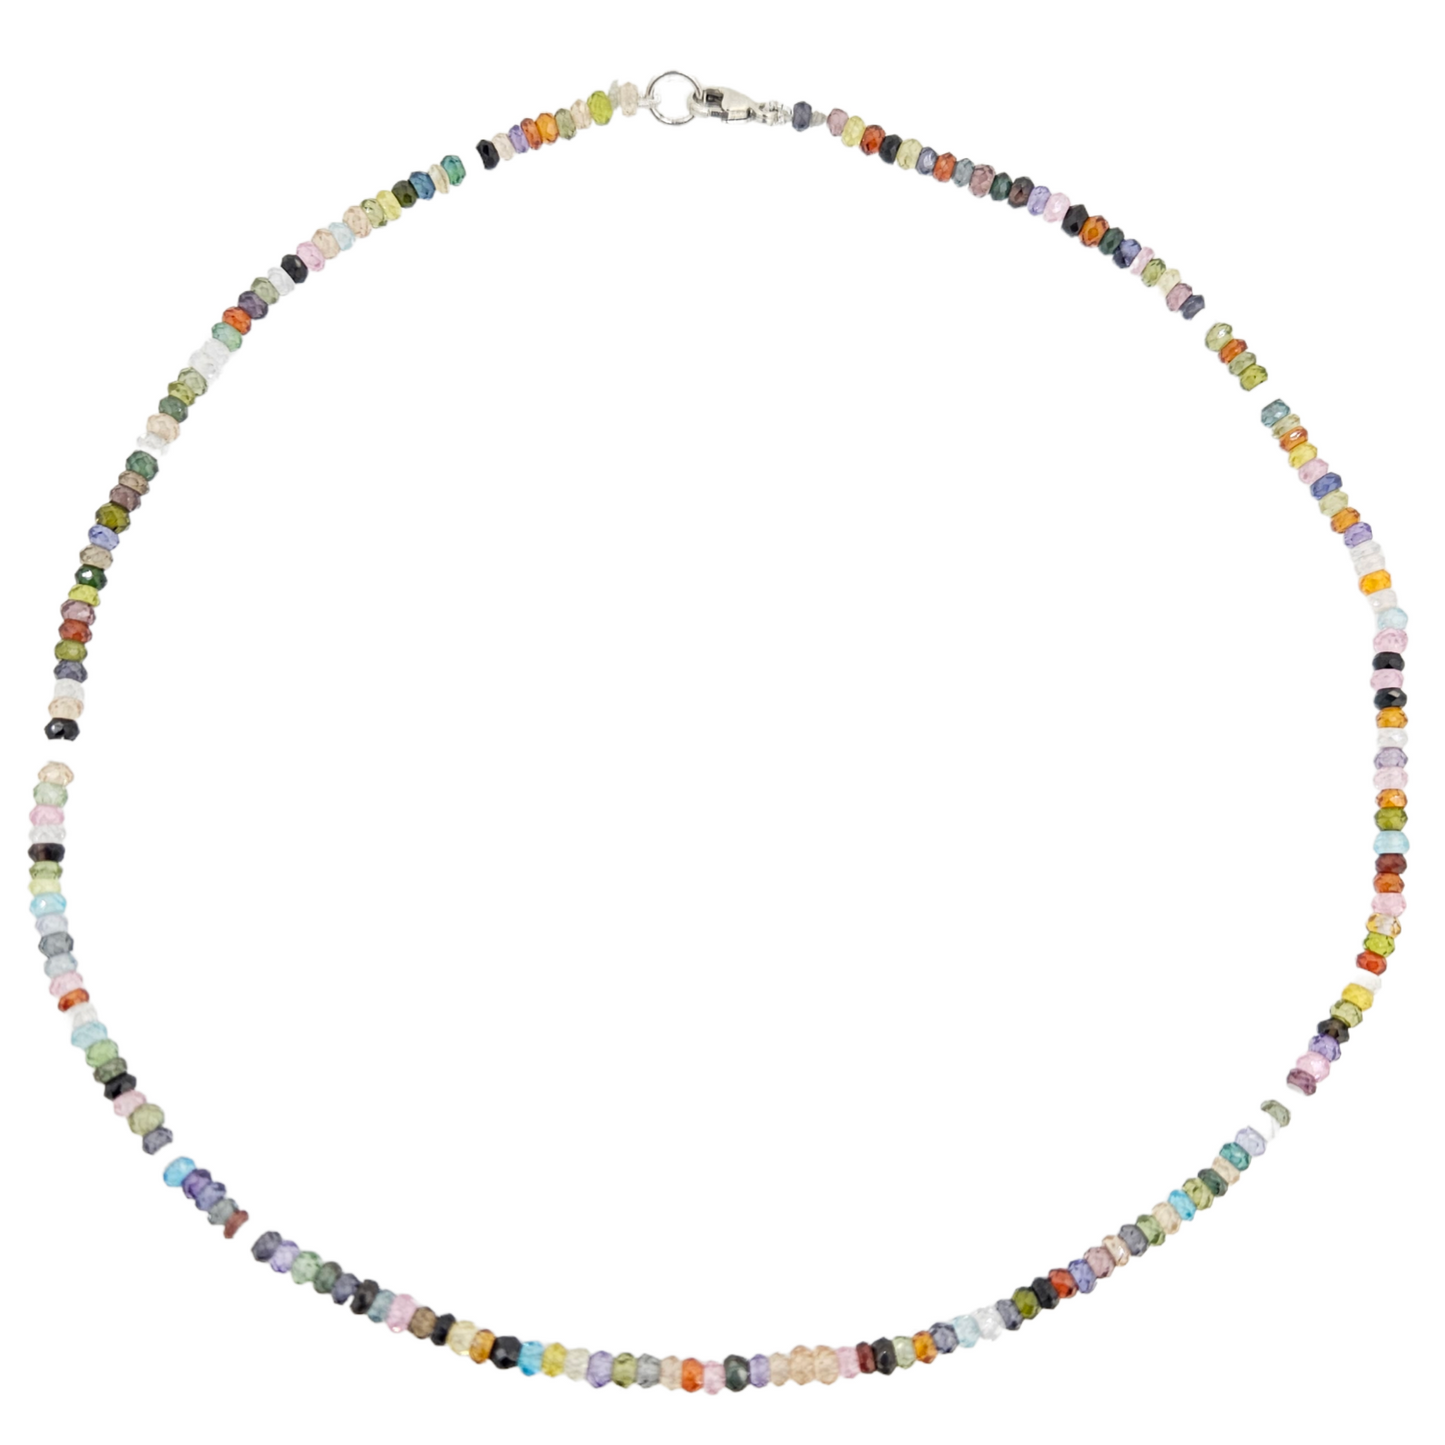 Choker Style Crystal Bead Necklace